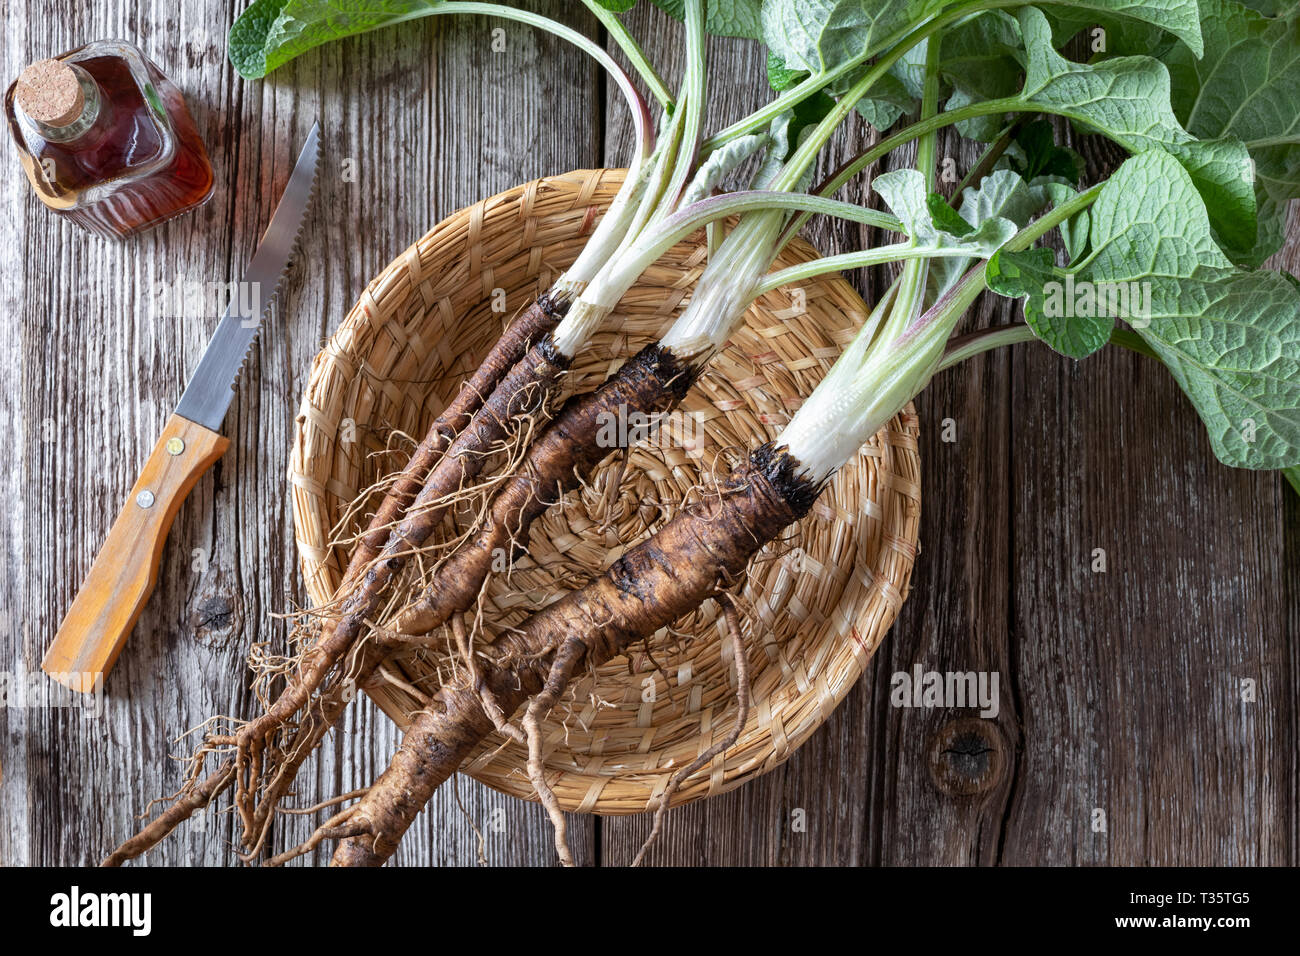 Burdock plants with roots and tincture, top view Stock Photo